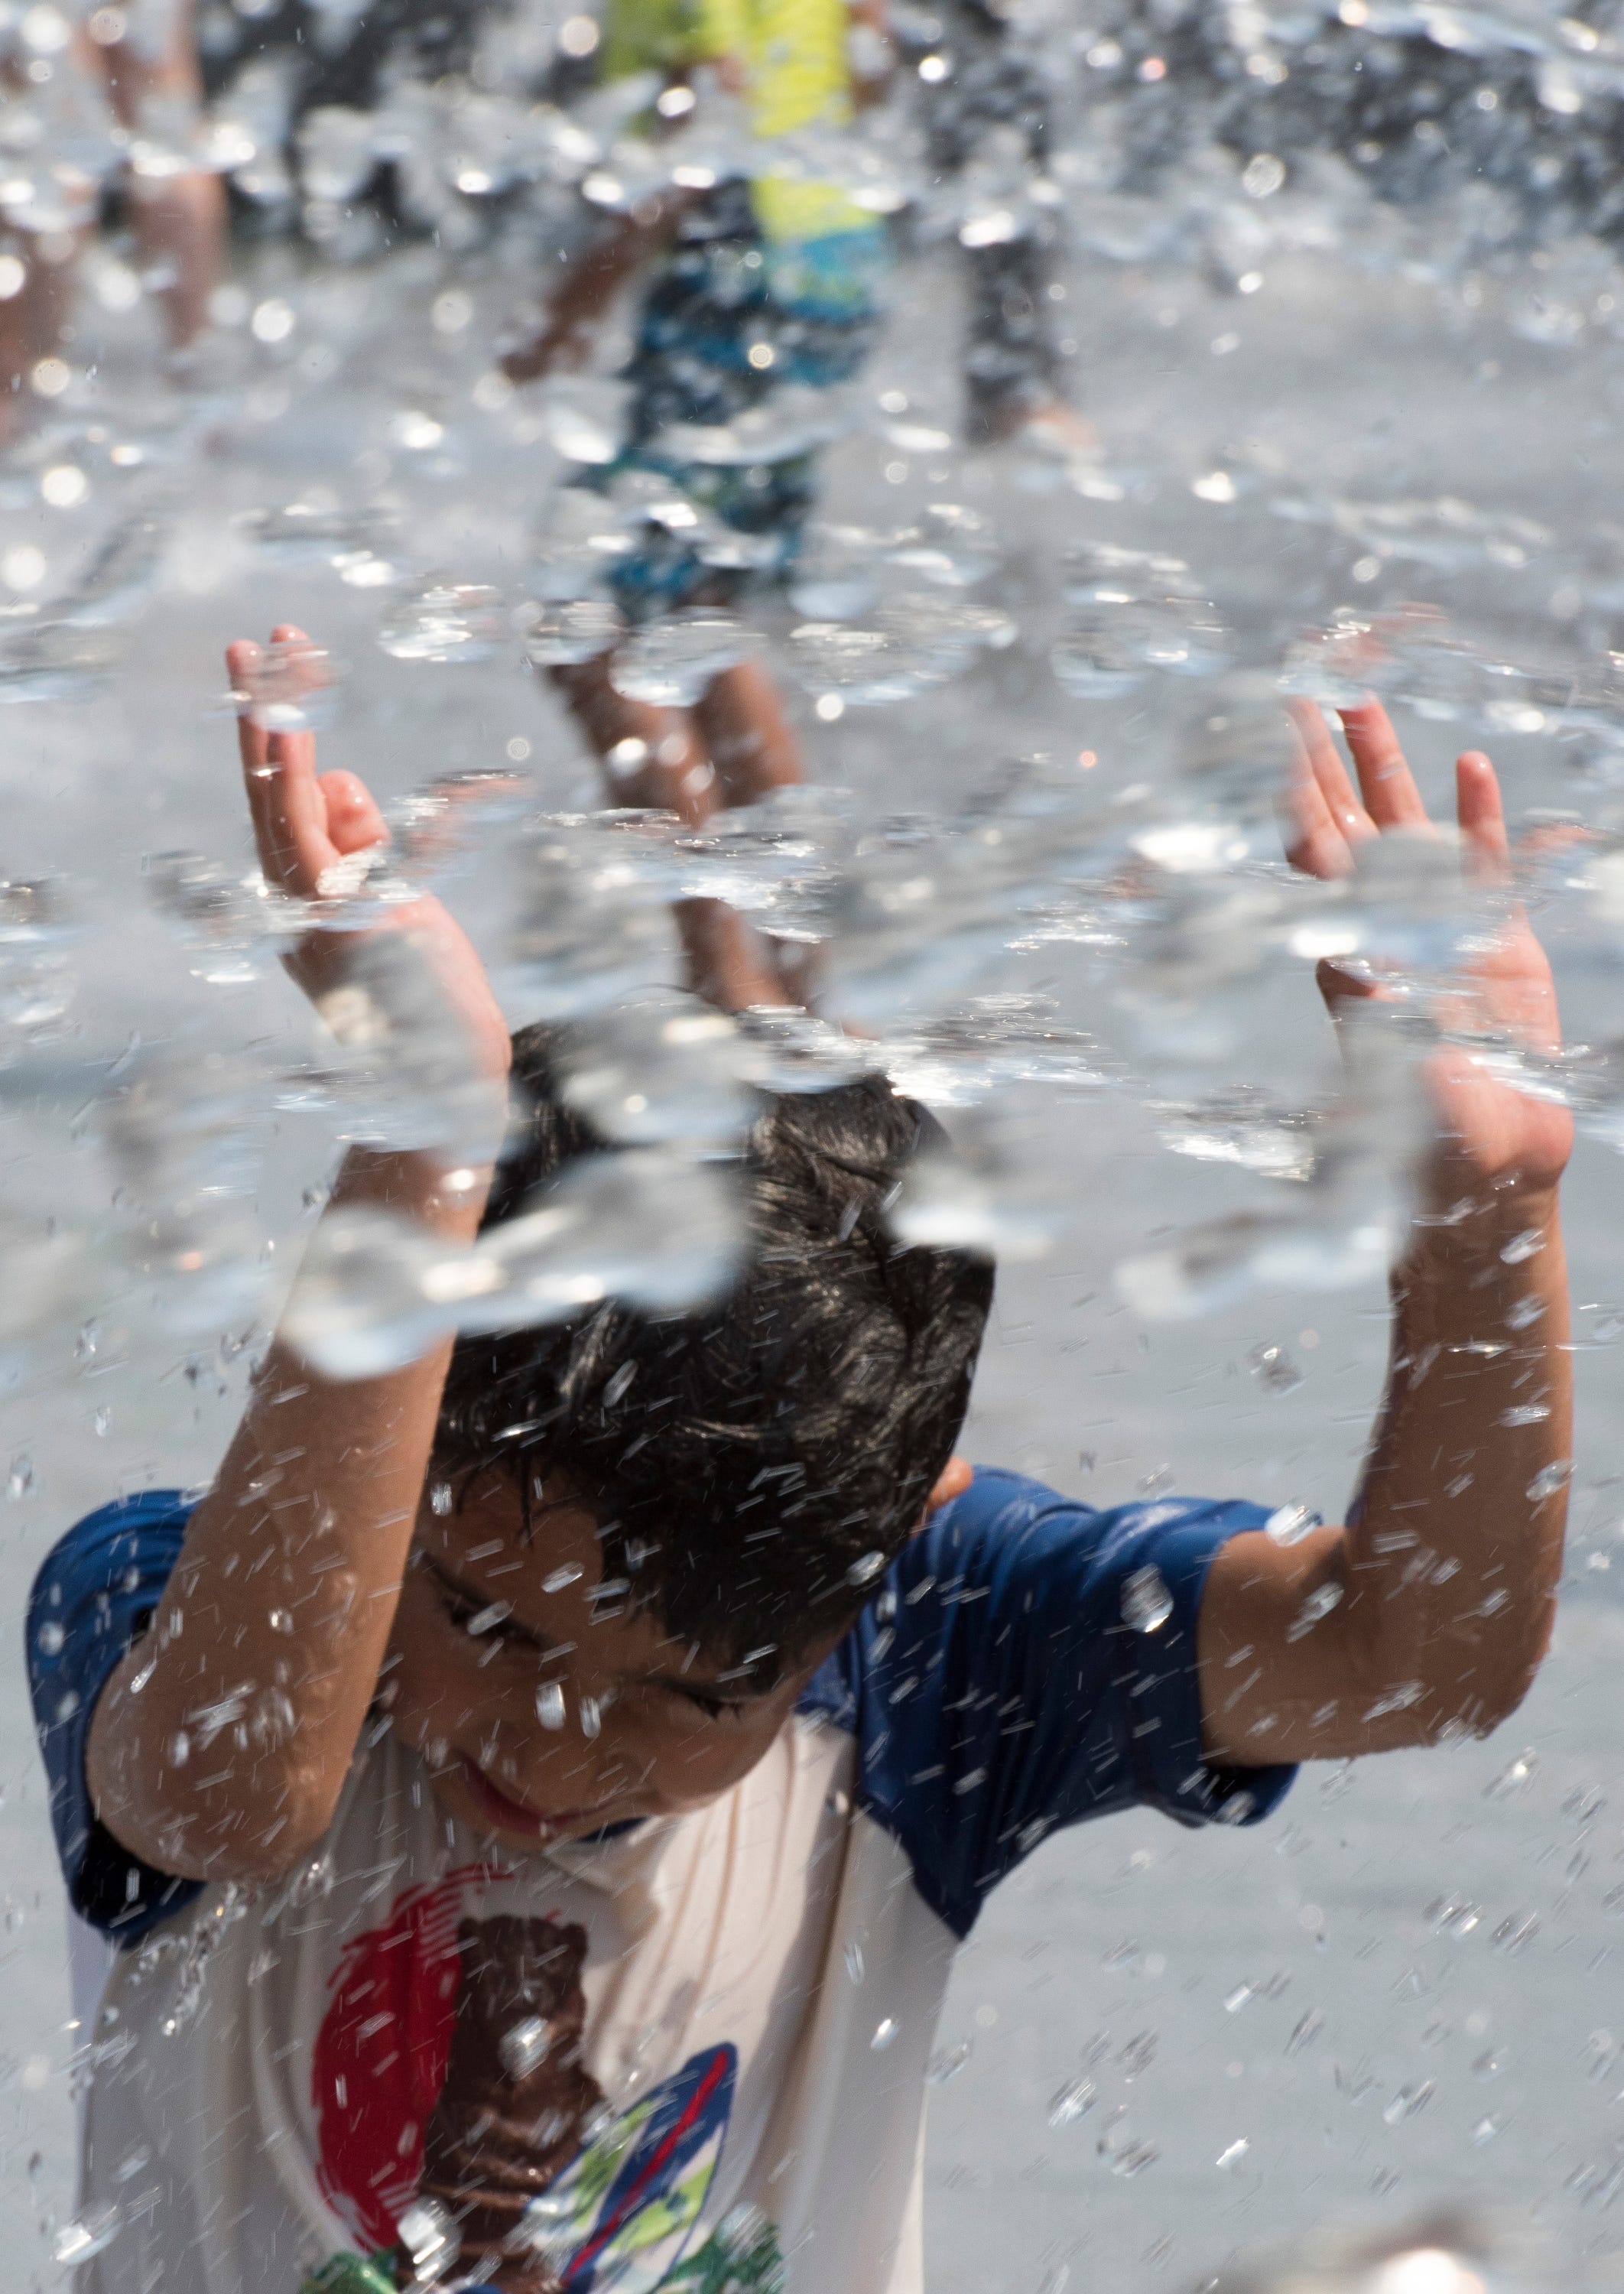 Children cool off in the water spray park at Georgetown Waterfront Park in Washington D.C. as temperatures continue to soar in the 90s to near 100 degrees on July 3, 2018.